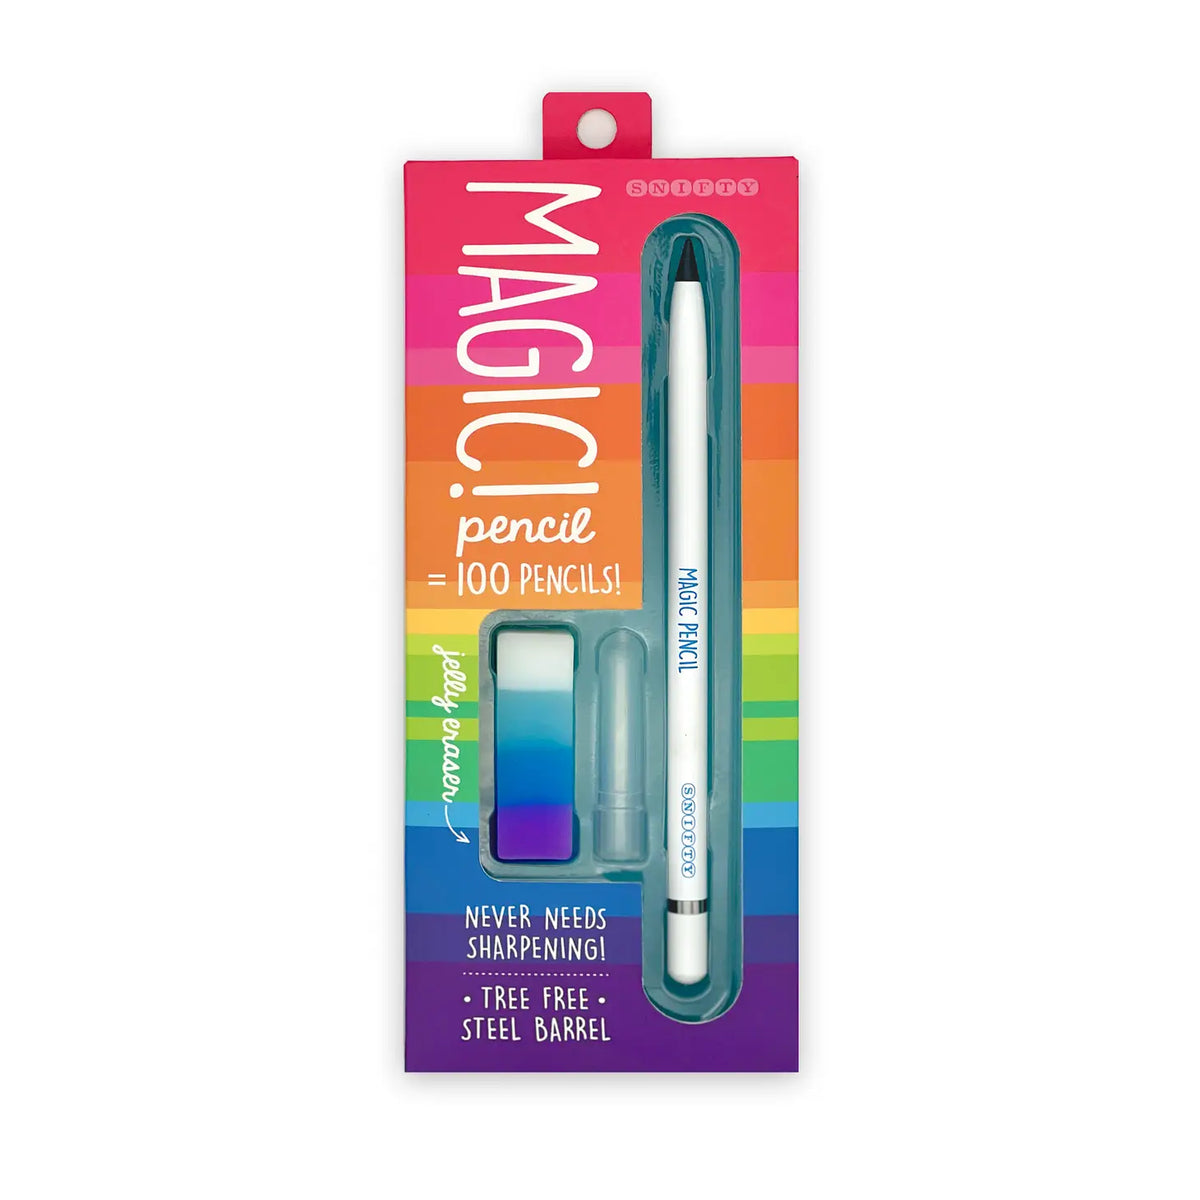 Snifty Mood Color Changing Pencil Set